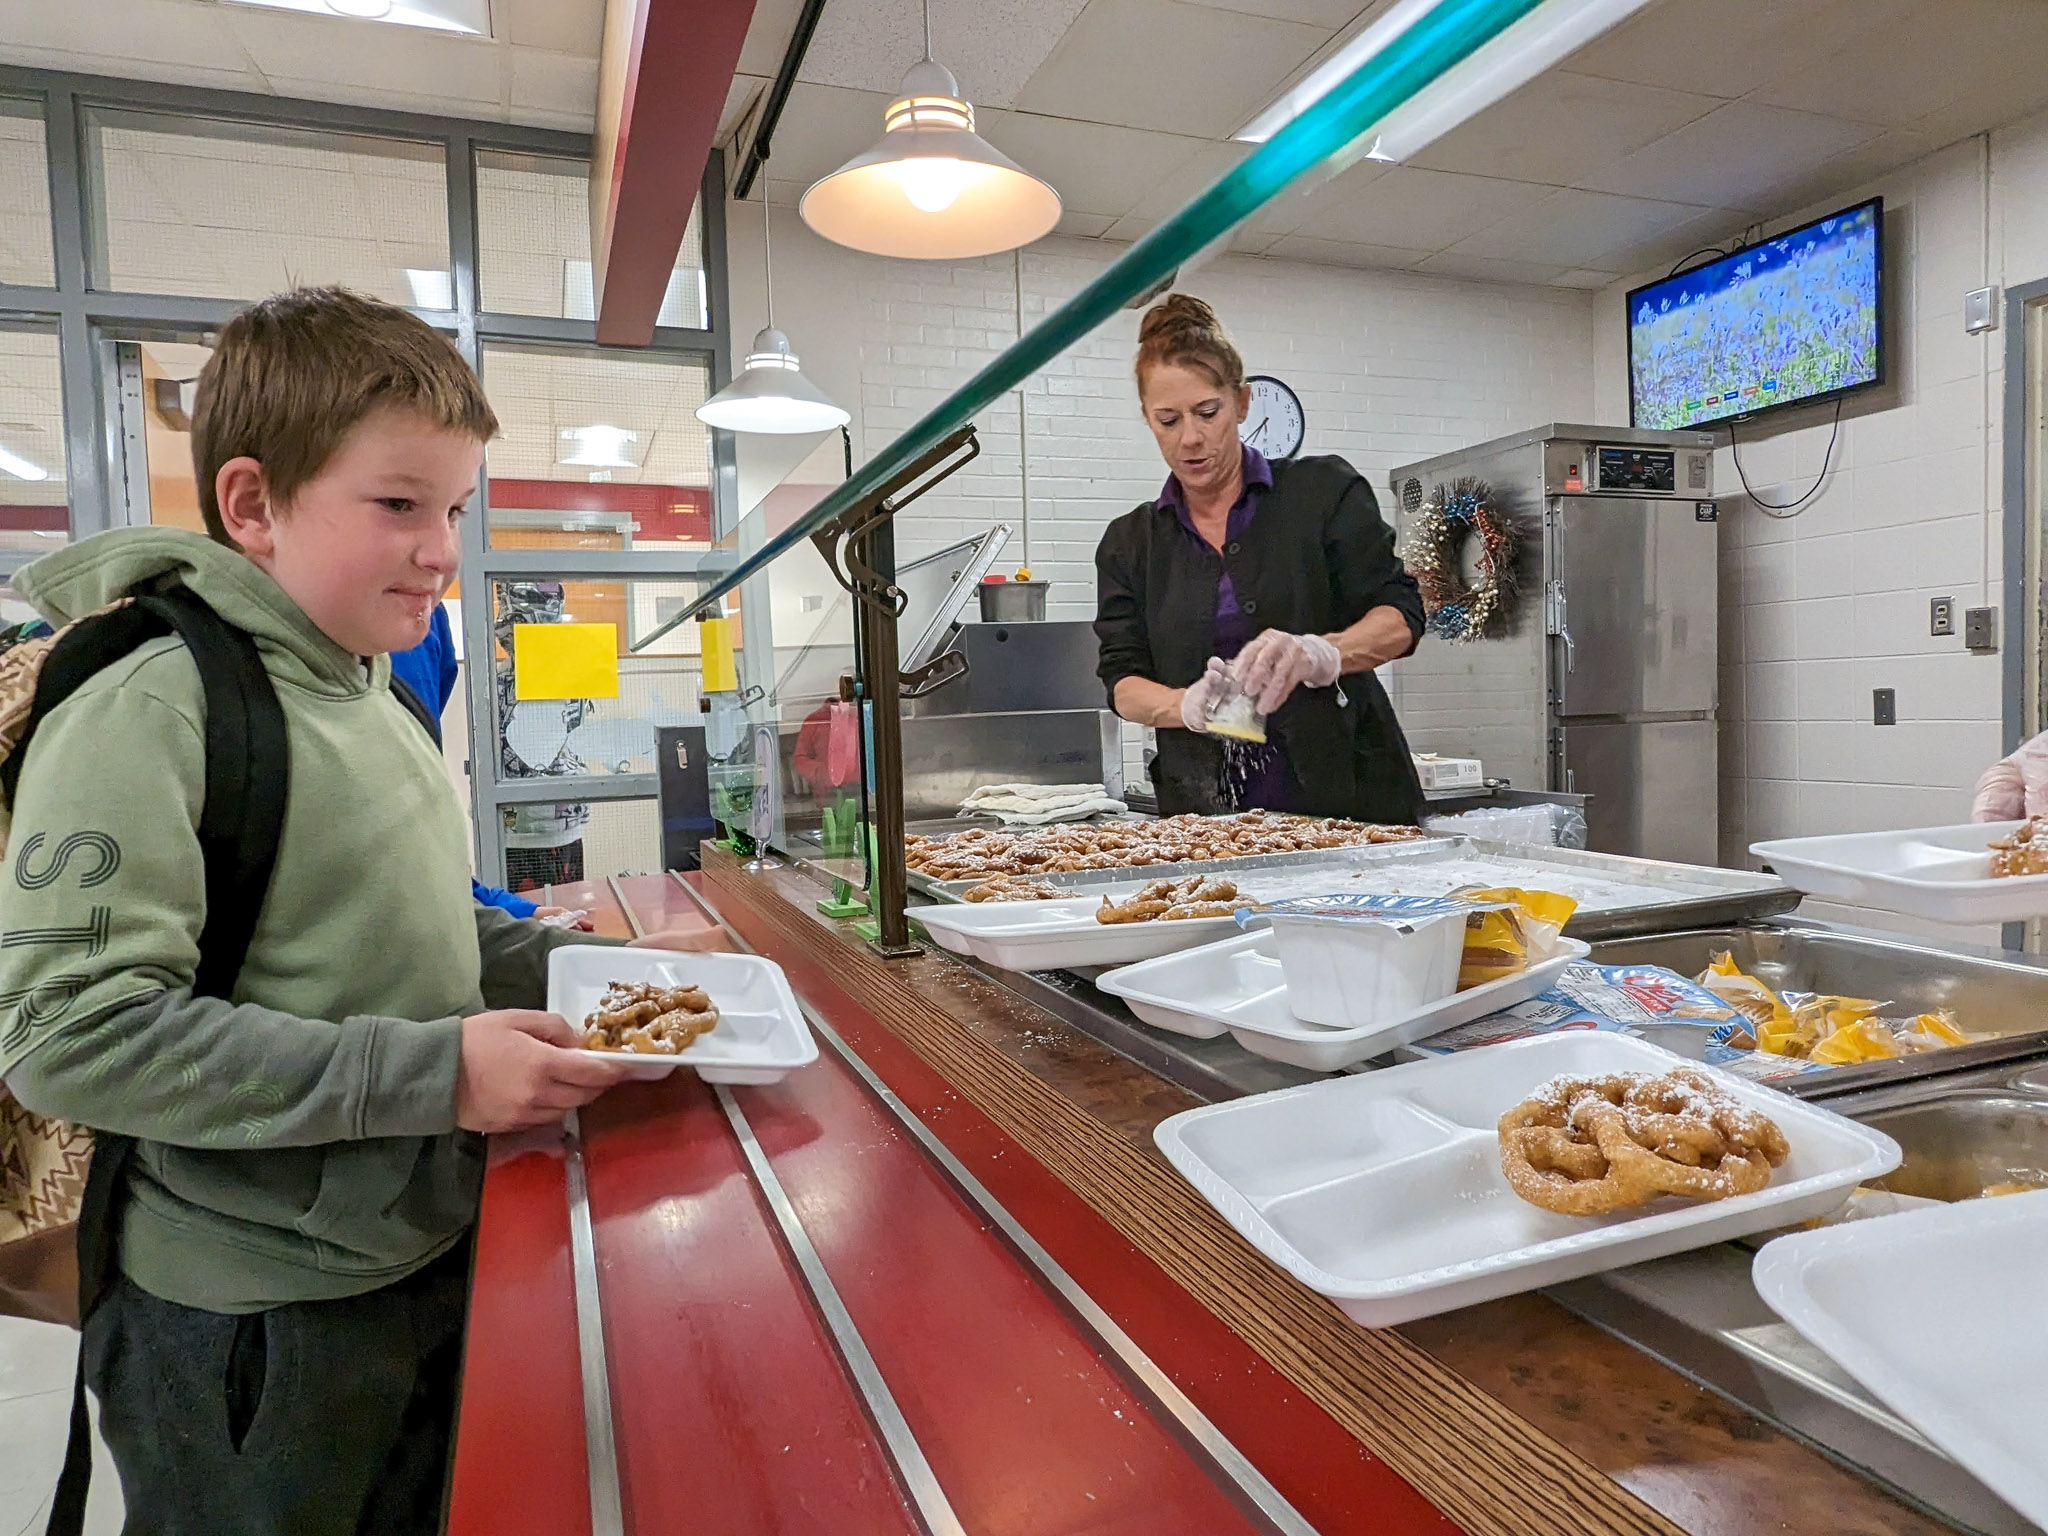 A young student slides his breakfast tray down the cafeteria counter as the nutrition specialist greets him